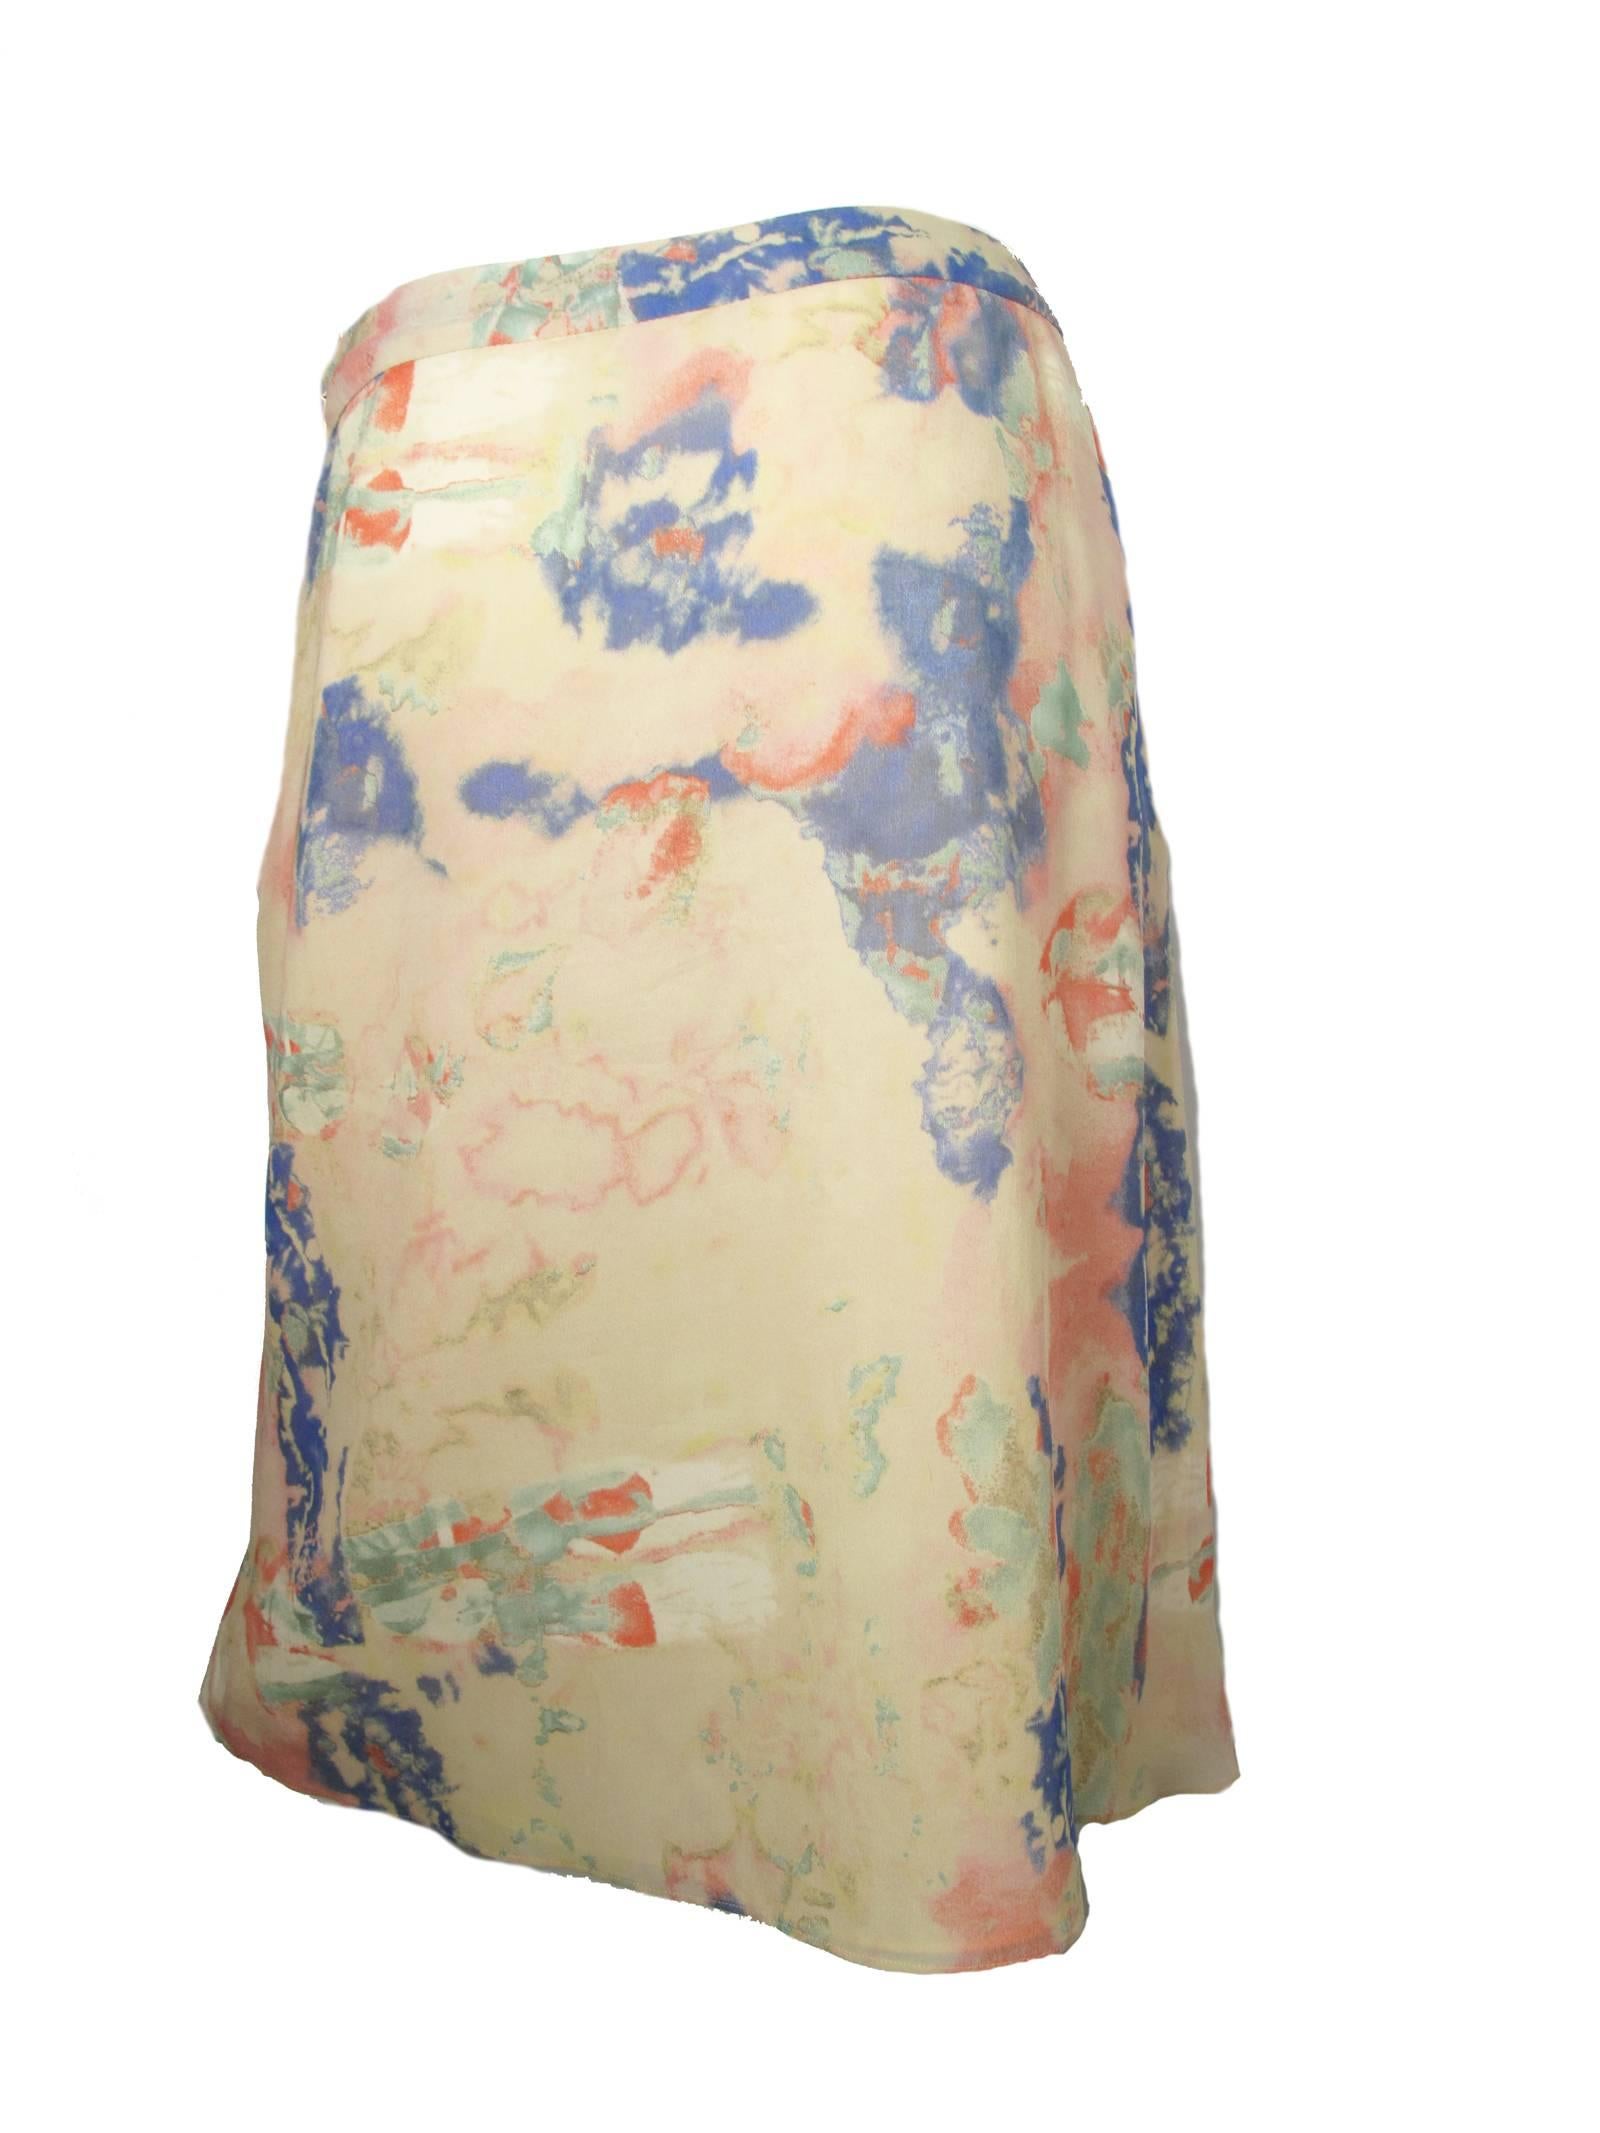 Christian Lacroix silk pastel watercolor skirt.  Condition: Excellent. Made in France. Size 40 / US 6 - 8 
31